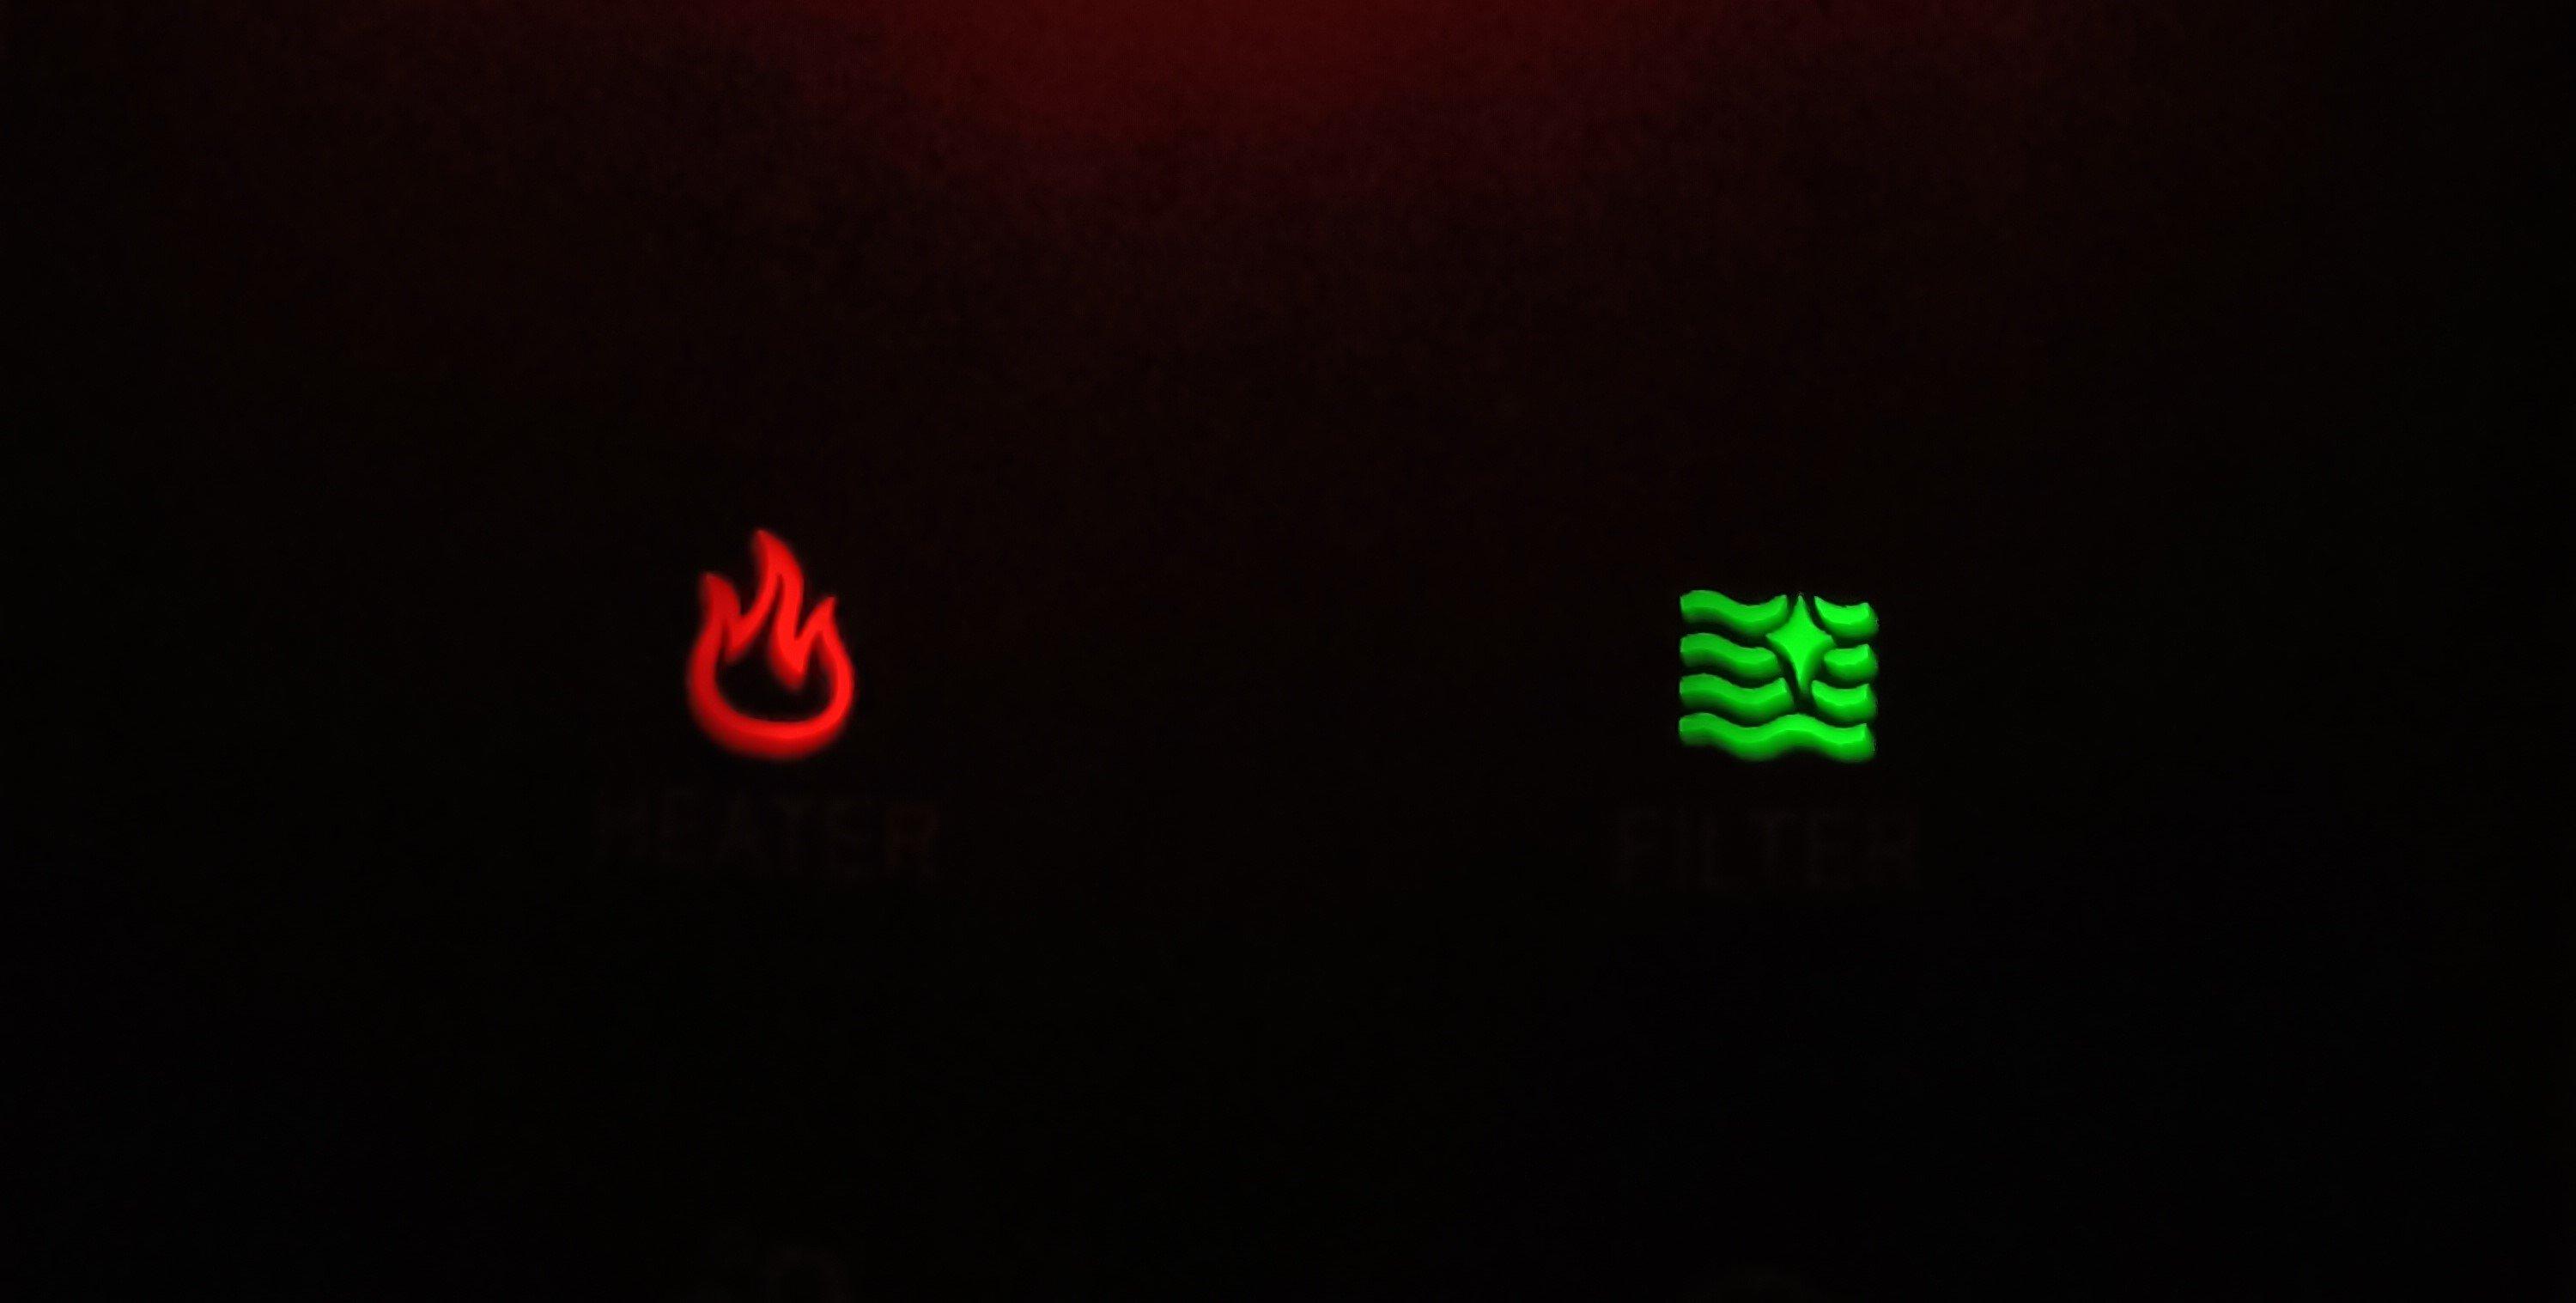 Heat Light Turns Red After 10-15 Seconds